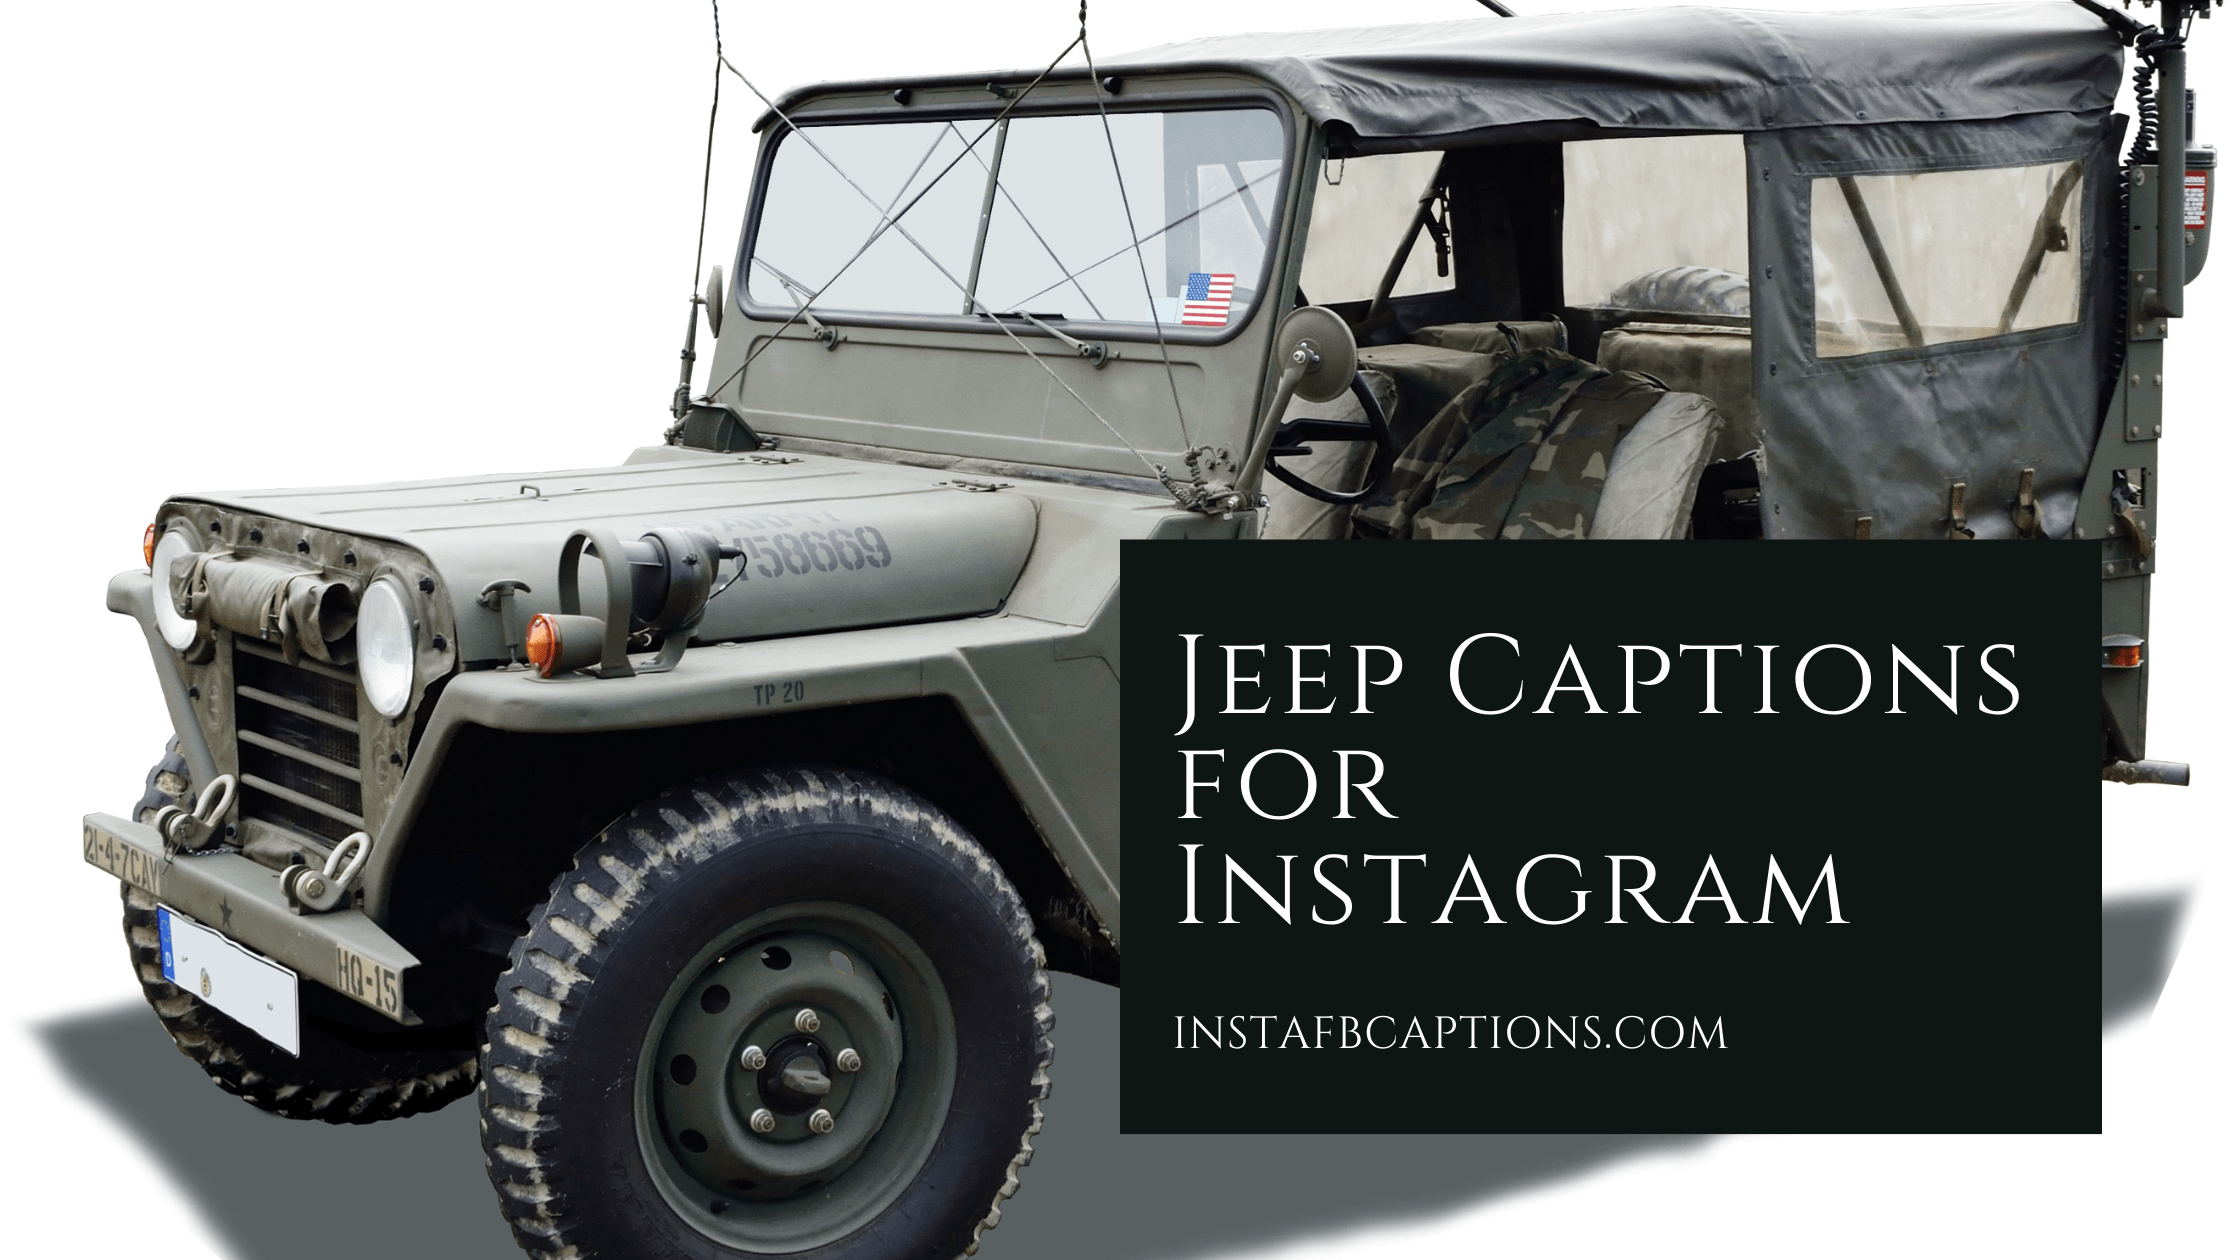 Jeep Captions For Instagram  - Jeep Captions for Instagram - 92 Jeep Instagram Captions Quotes for 2022